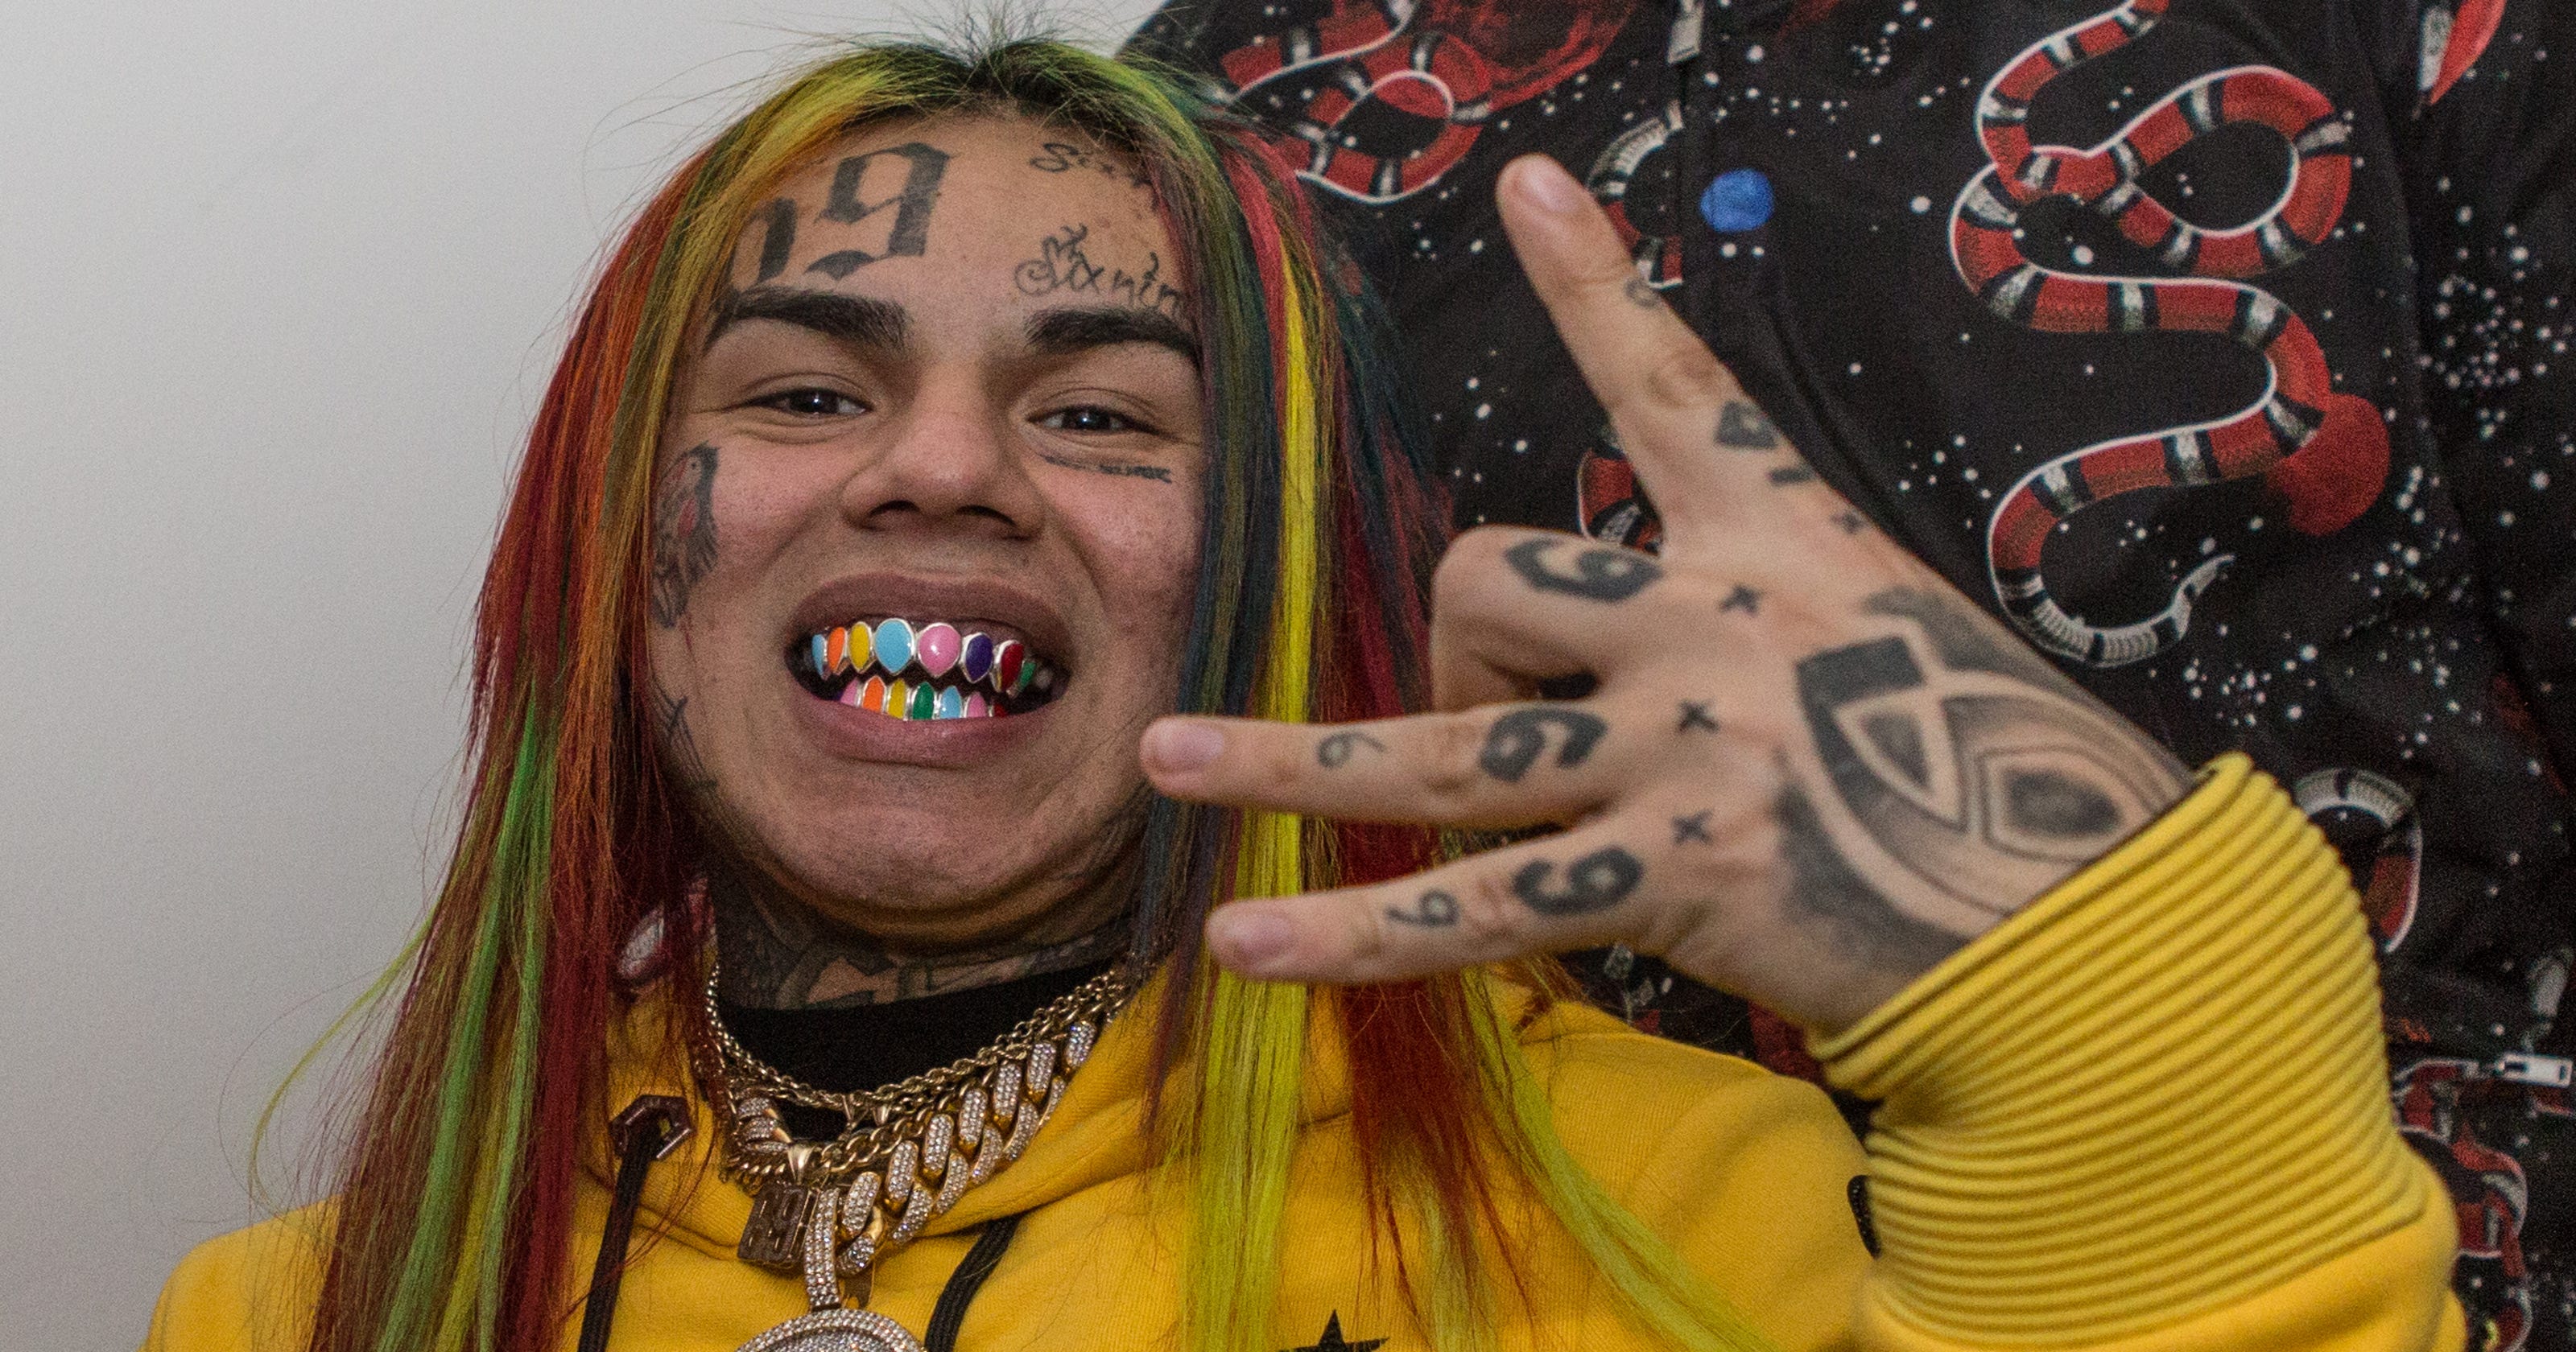 1. "Takashi 6ix9ine Shows Off New Blue Hair on Instagram" 
2. "Takashi 6ix9ine's Blue Hair Sparks Controversy on Social Media" 
3. "Takashi 6ix9ine's Blue Hair: A Look Back at His Ever-Changing Hairstyles" 
4. "Takashi 6ix9ine's Blue Hair: The Meaning Behind the Color" 
5. "Takashi 6ix9ine's Blue Hair: How to Achieve the Look" 
6. "Takashi 6ix9ine's Blue Hair: Fans React to His Bold New Look" 
7. "Takashi 6ix9ine's Blue Hair: A Timeline of His Hair Evolution" 
8. "Takashi 6ix9ine's Blue Hair: The Inspiration Behind the Color" 
9. "Takashi 6ix9ine's Blue Hair: The Controversy Surrounding His Hair Choices" 
10. "Takashi 6ix9ine's Blue Hair: The Impact of His Bold Style on Pop Culture" - wide 1